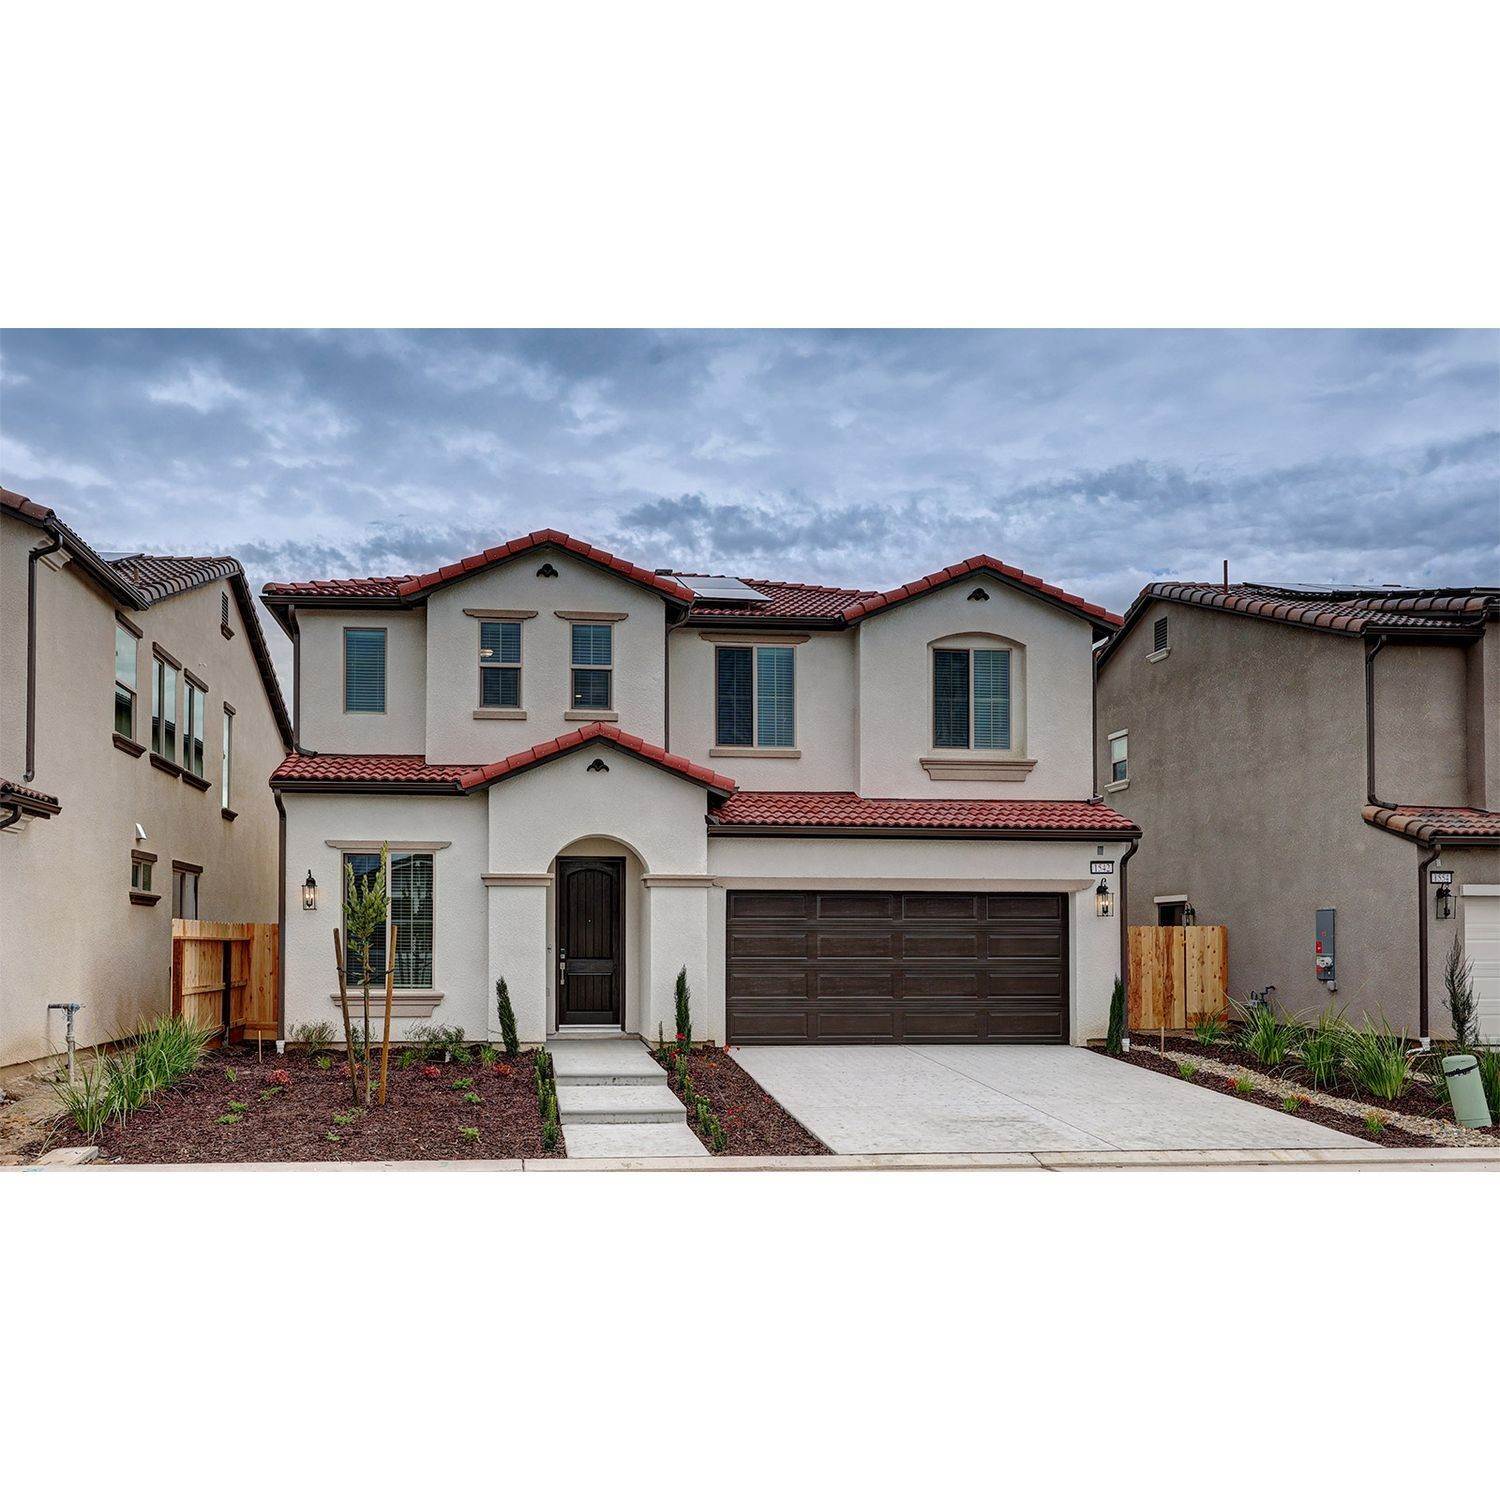 Single Family for Sale at Fresno, CA 93730